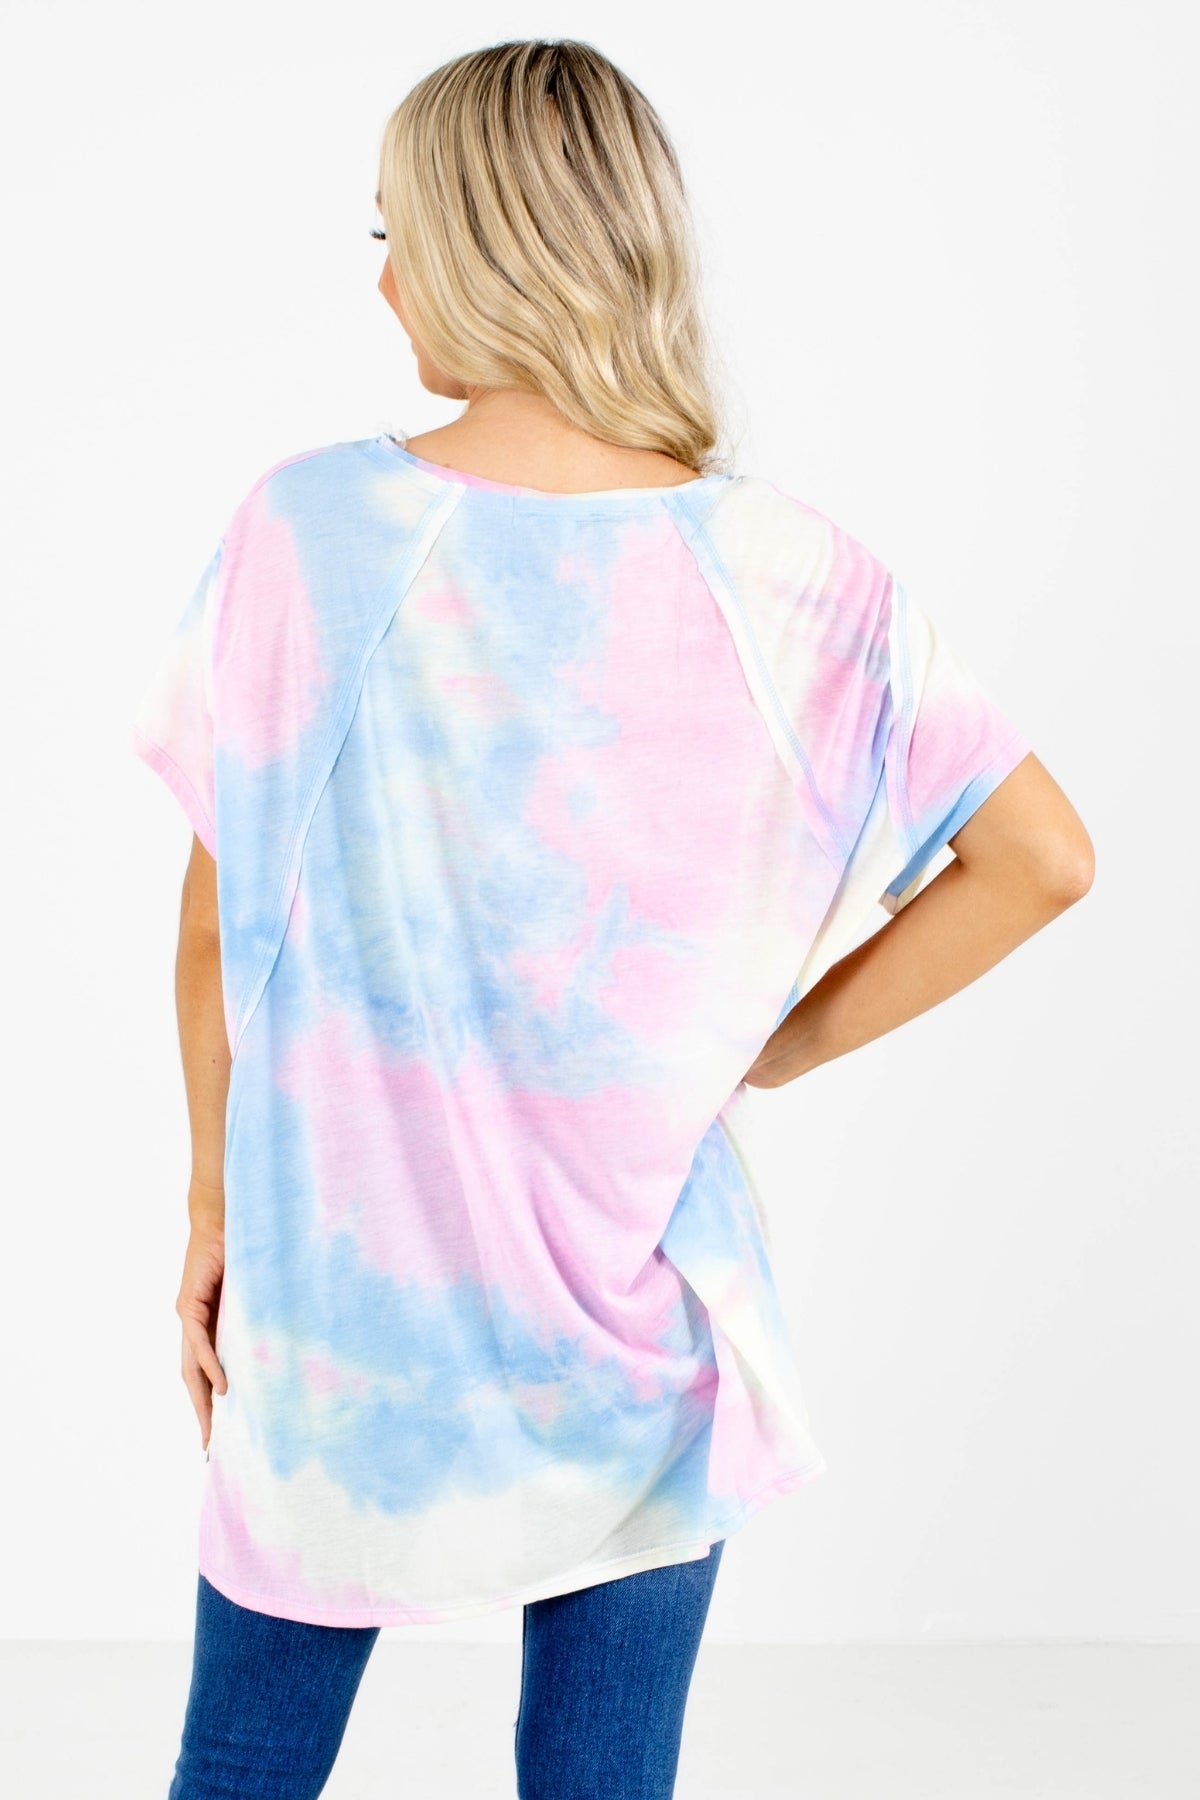 Pink, Blue, and White Tie Dye Boutique Top